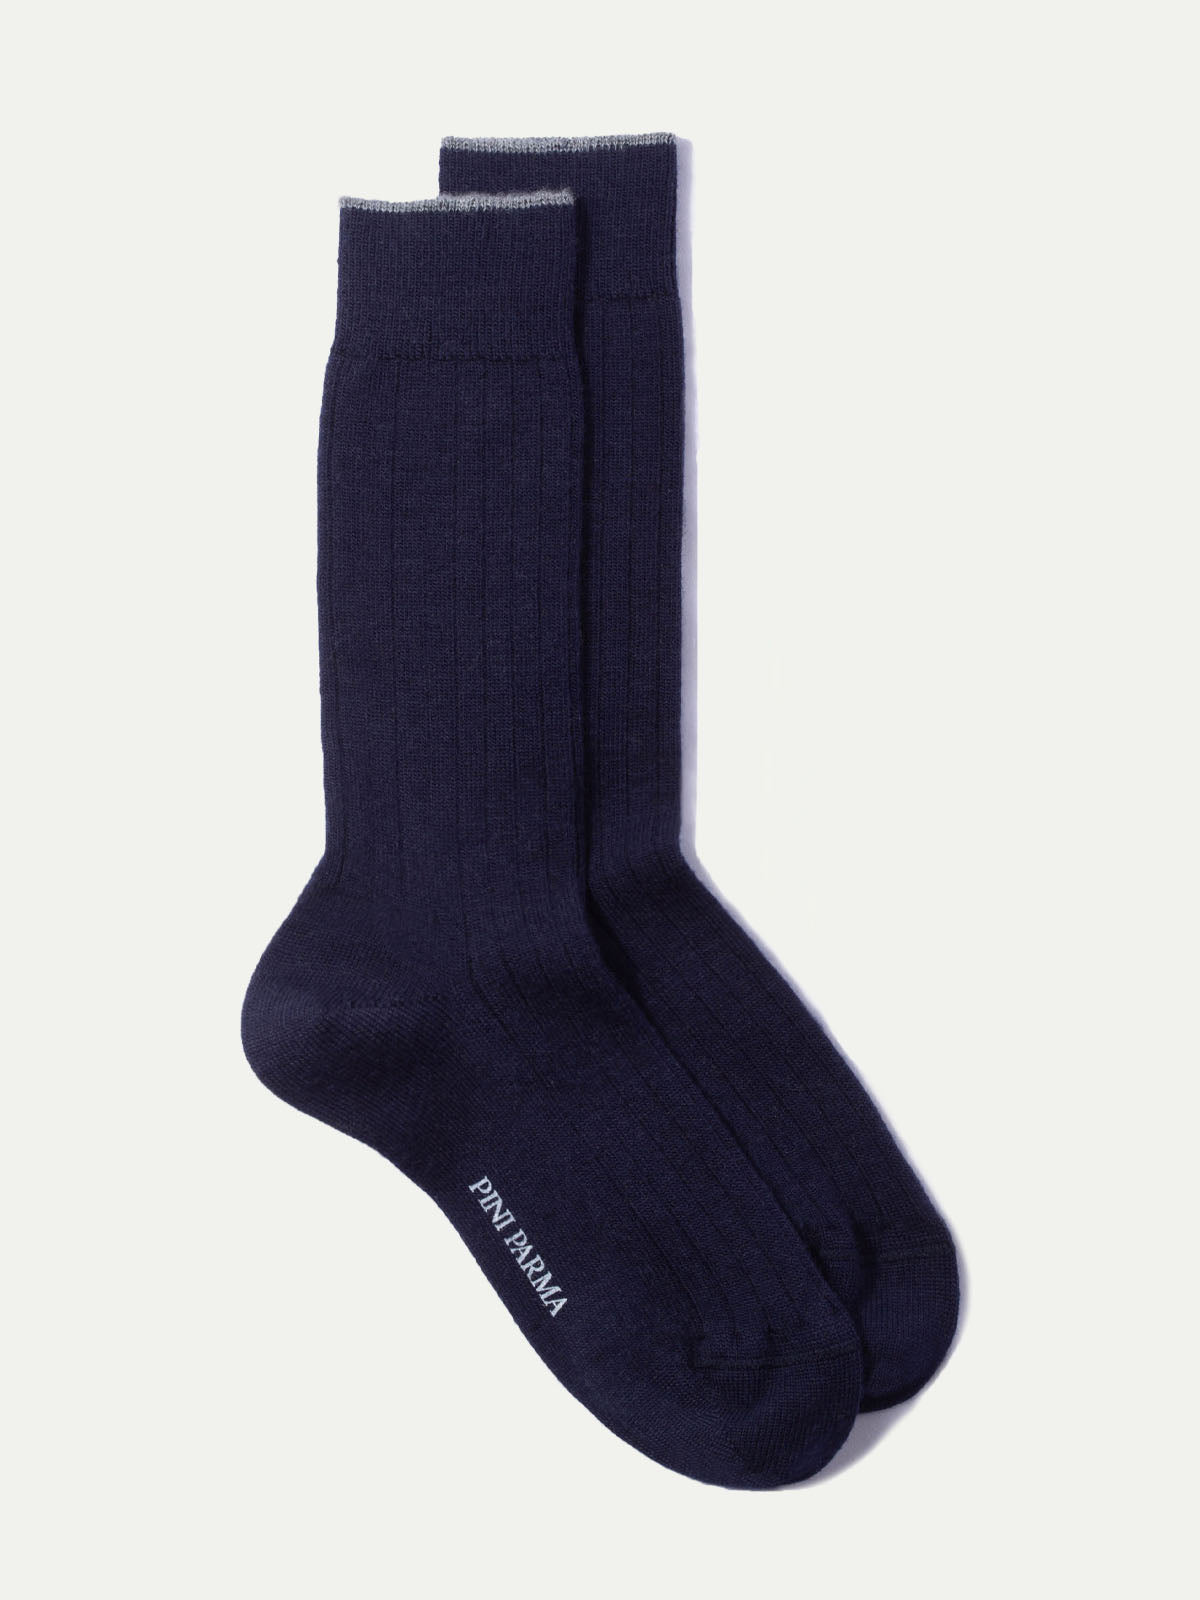 Blue - Super durable Wool short socks - Made in Italy